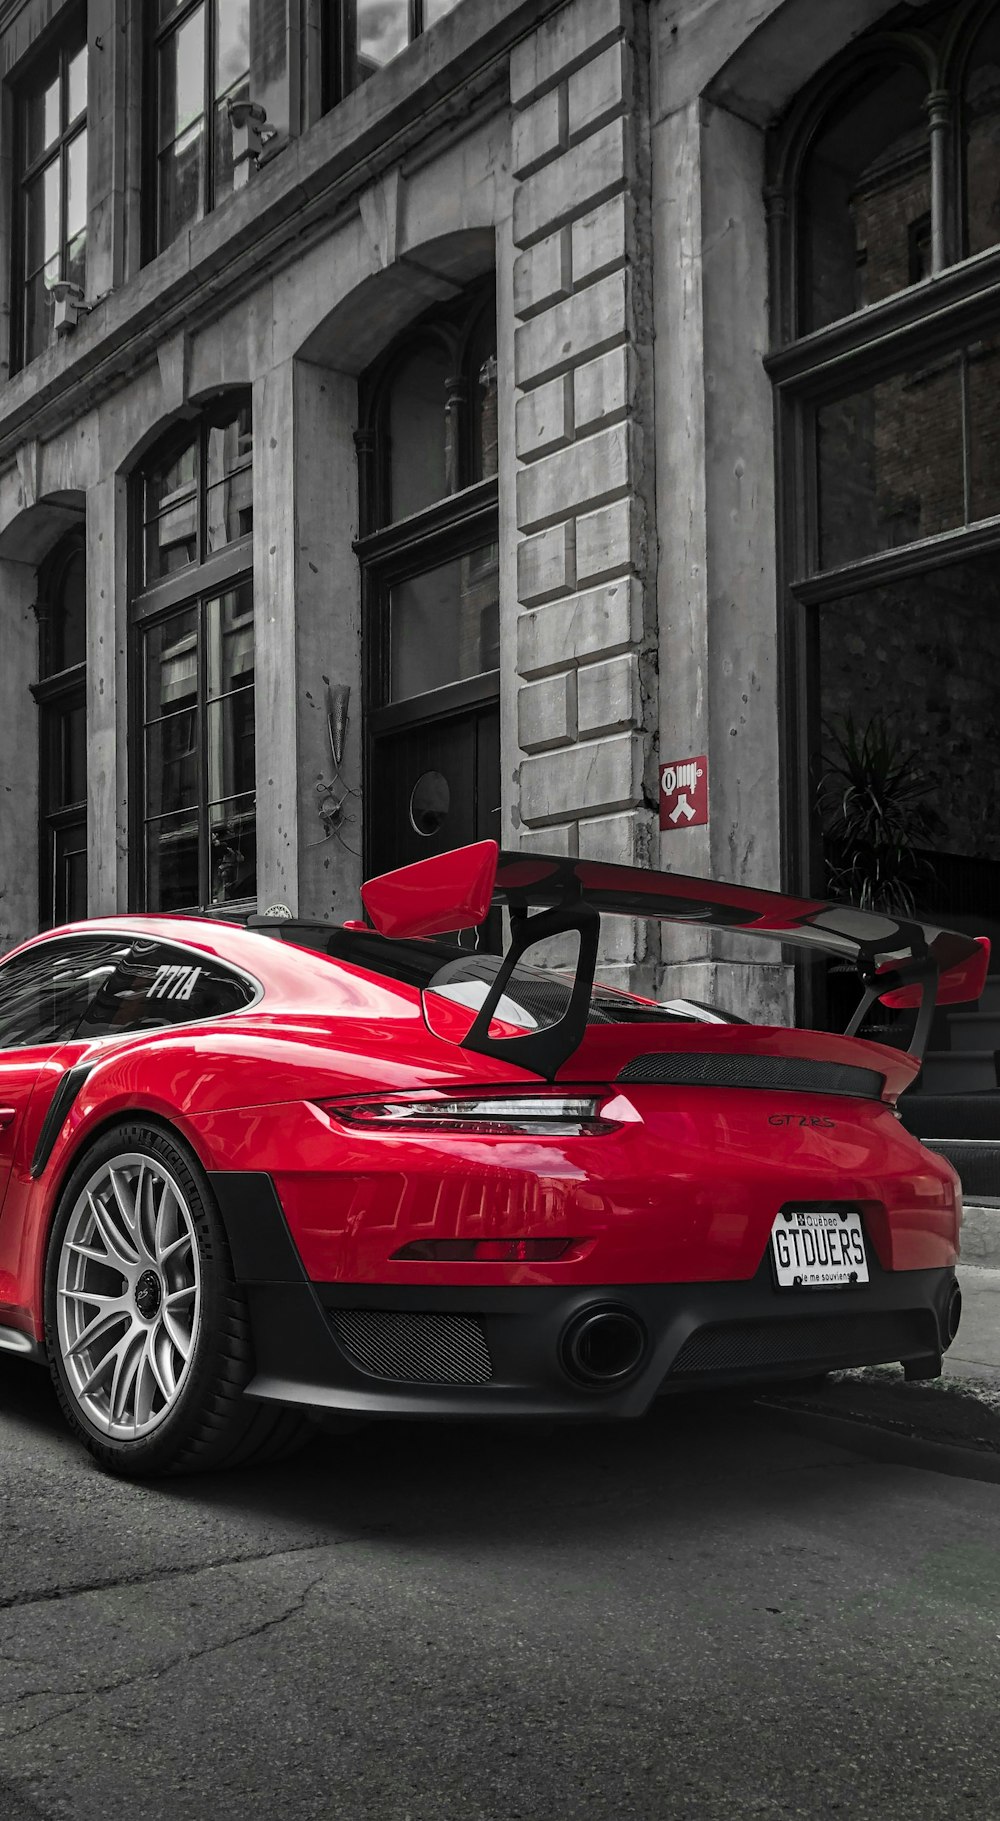 selective color photography of red Porsche sports car parked at roadside